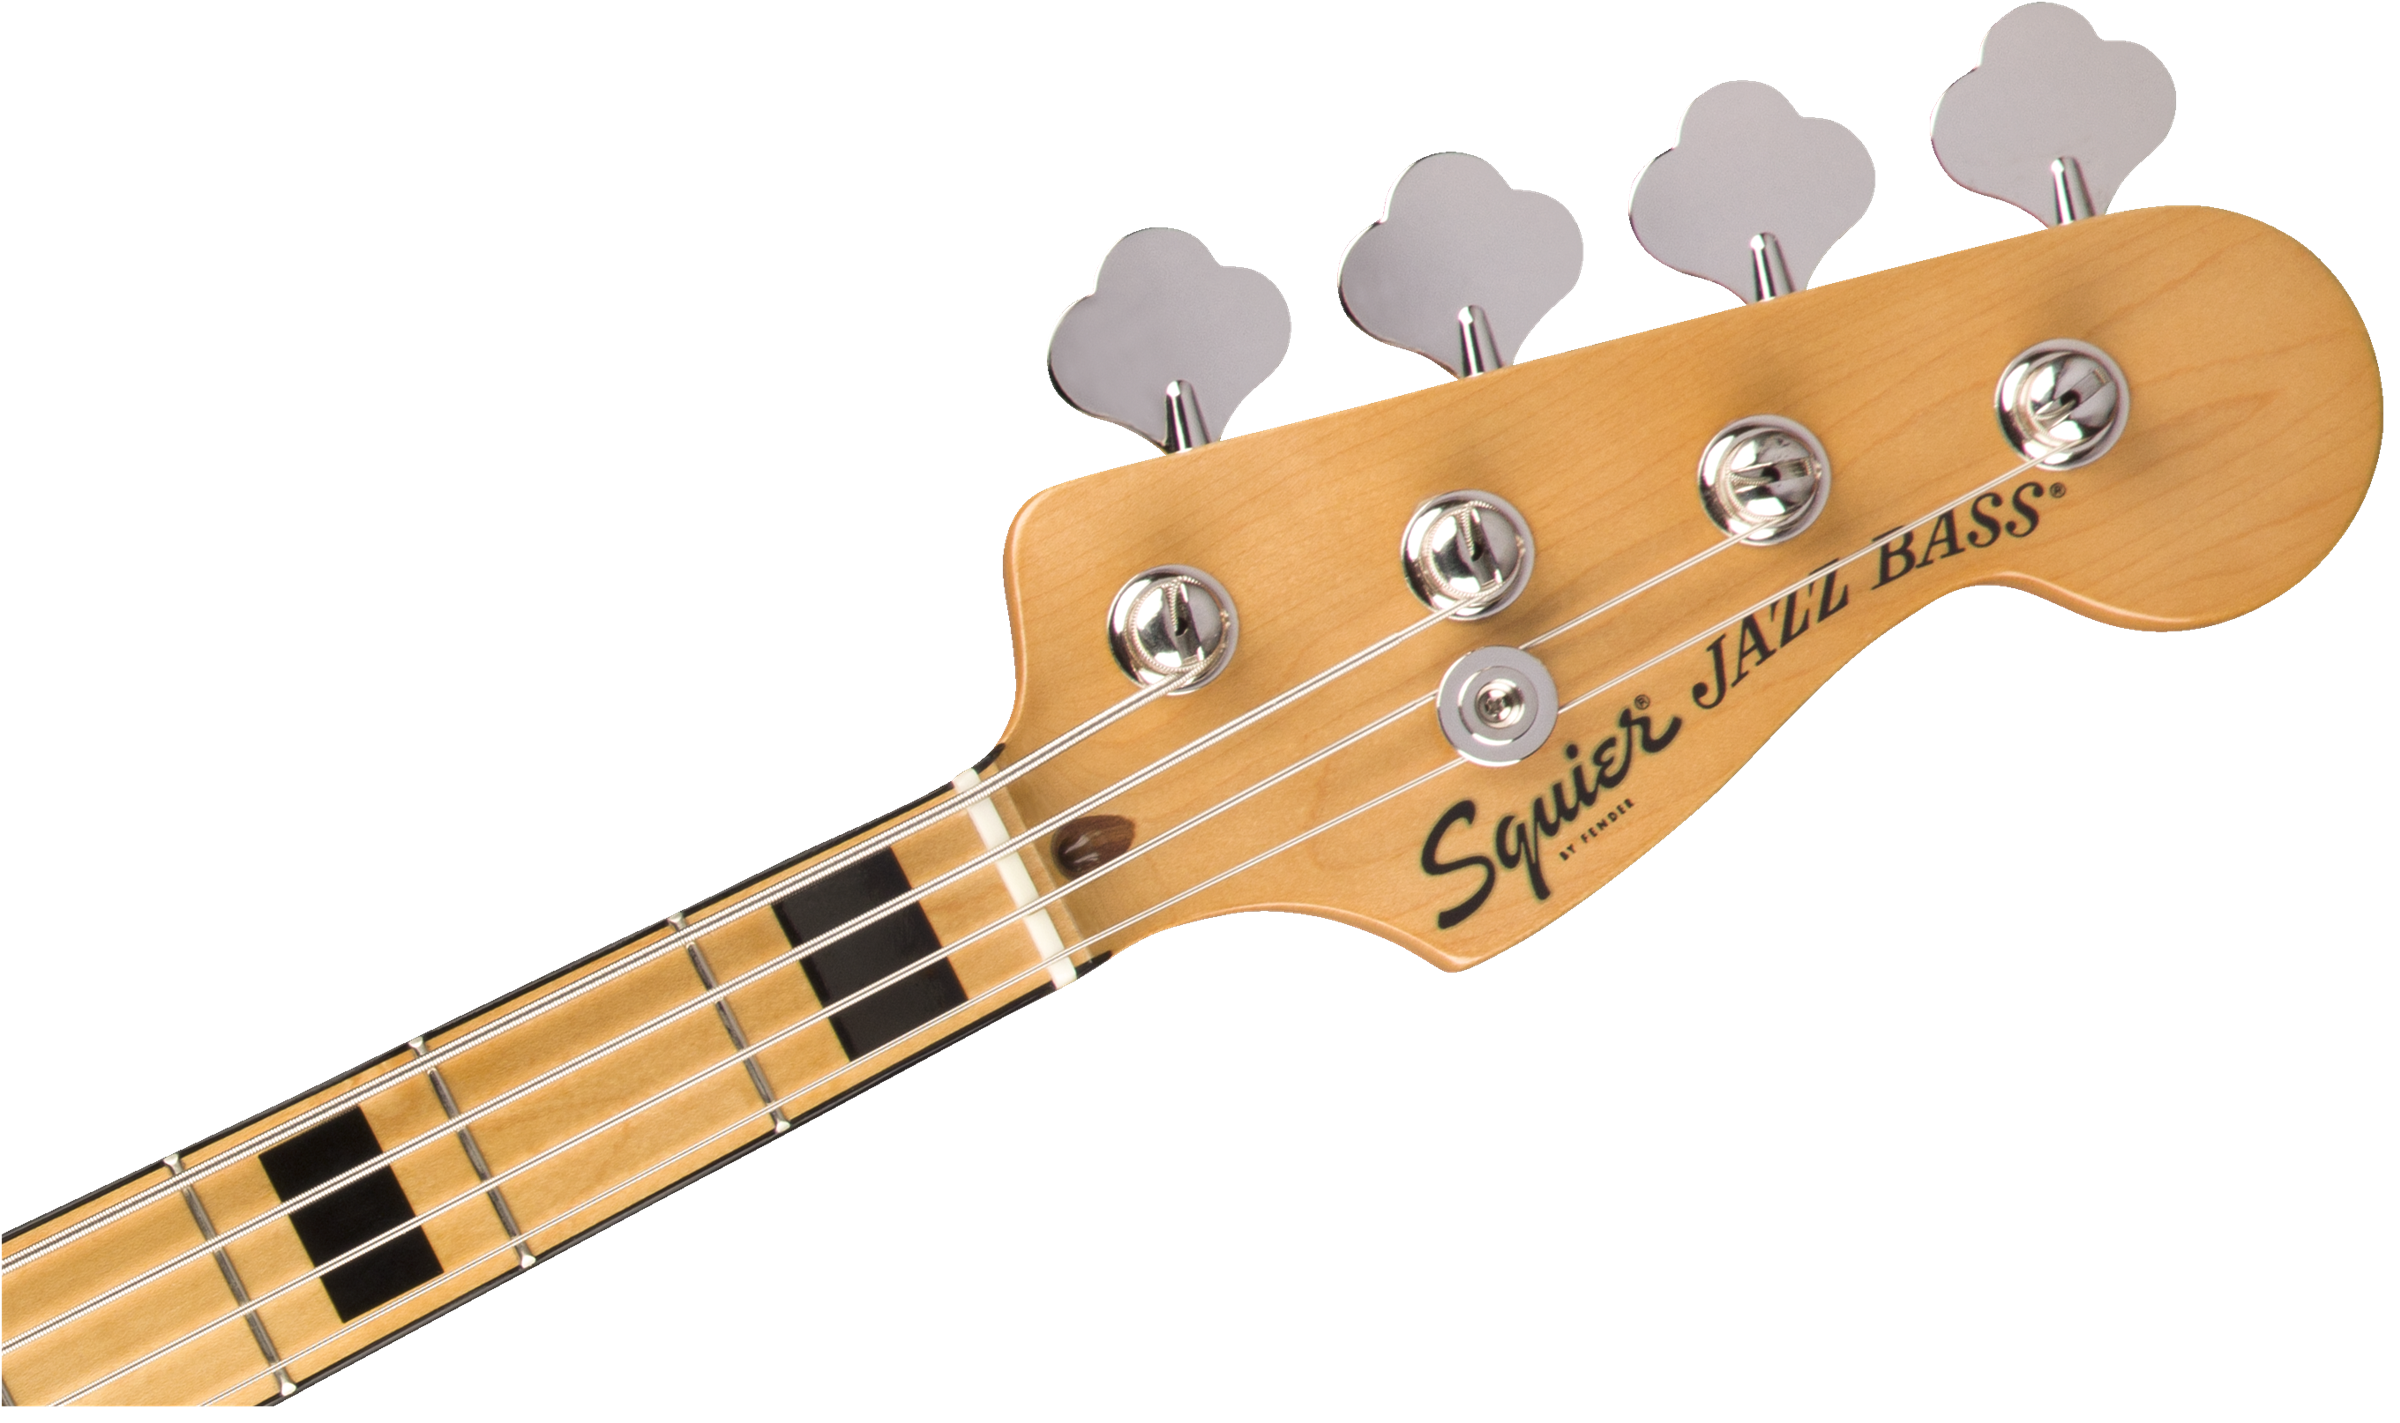 SQUIER Classic Vibe 70s Jazz Bass Maple Fingerboard Natural 2019 0374540521